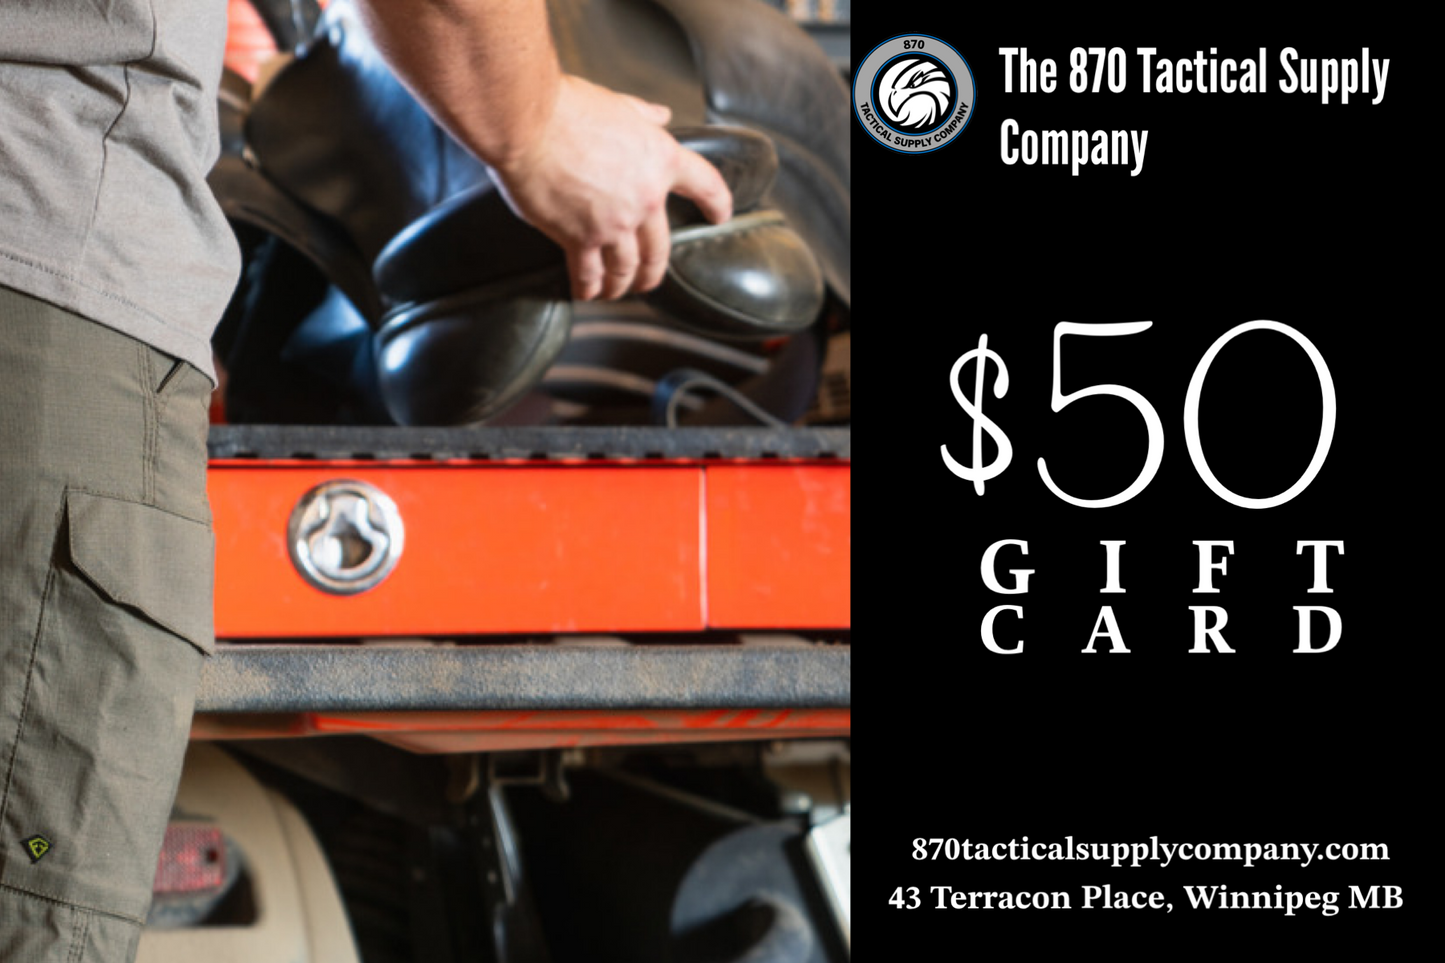 The 870 Tactical Supply Company Gift Card